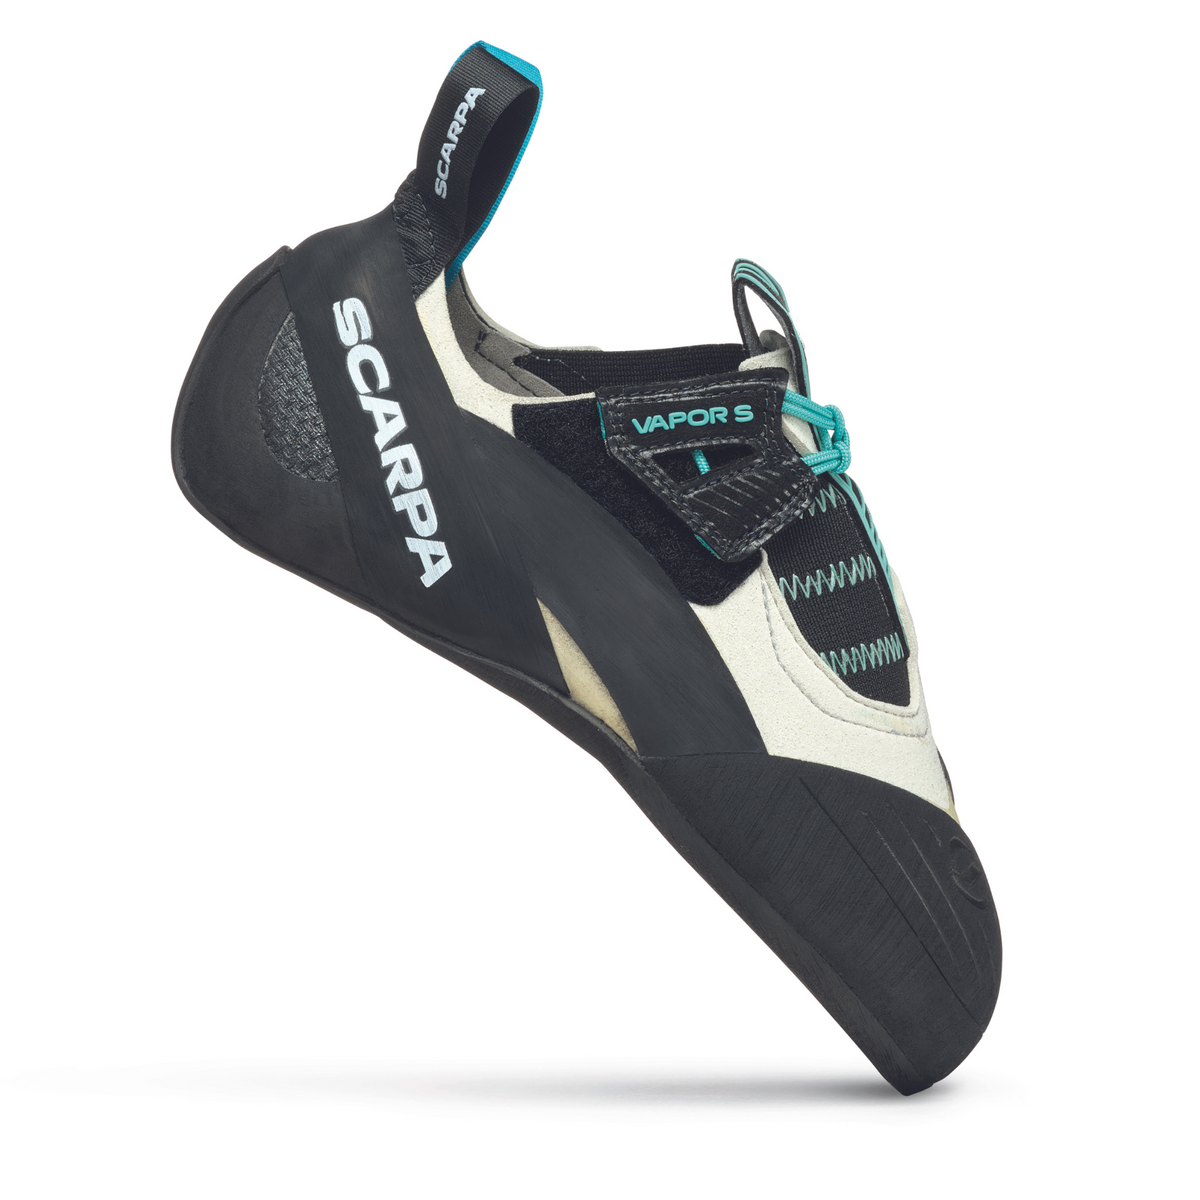 Scarpa Vapour S Womens in Dust Grey-Aqua. Side view showing logo and removable strap